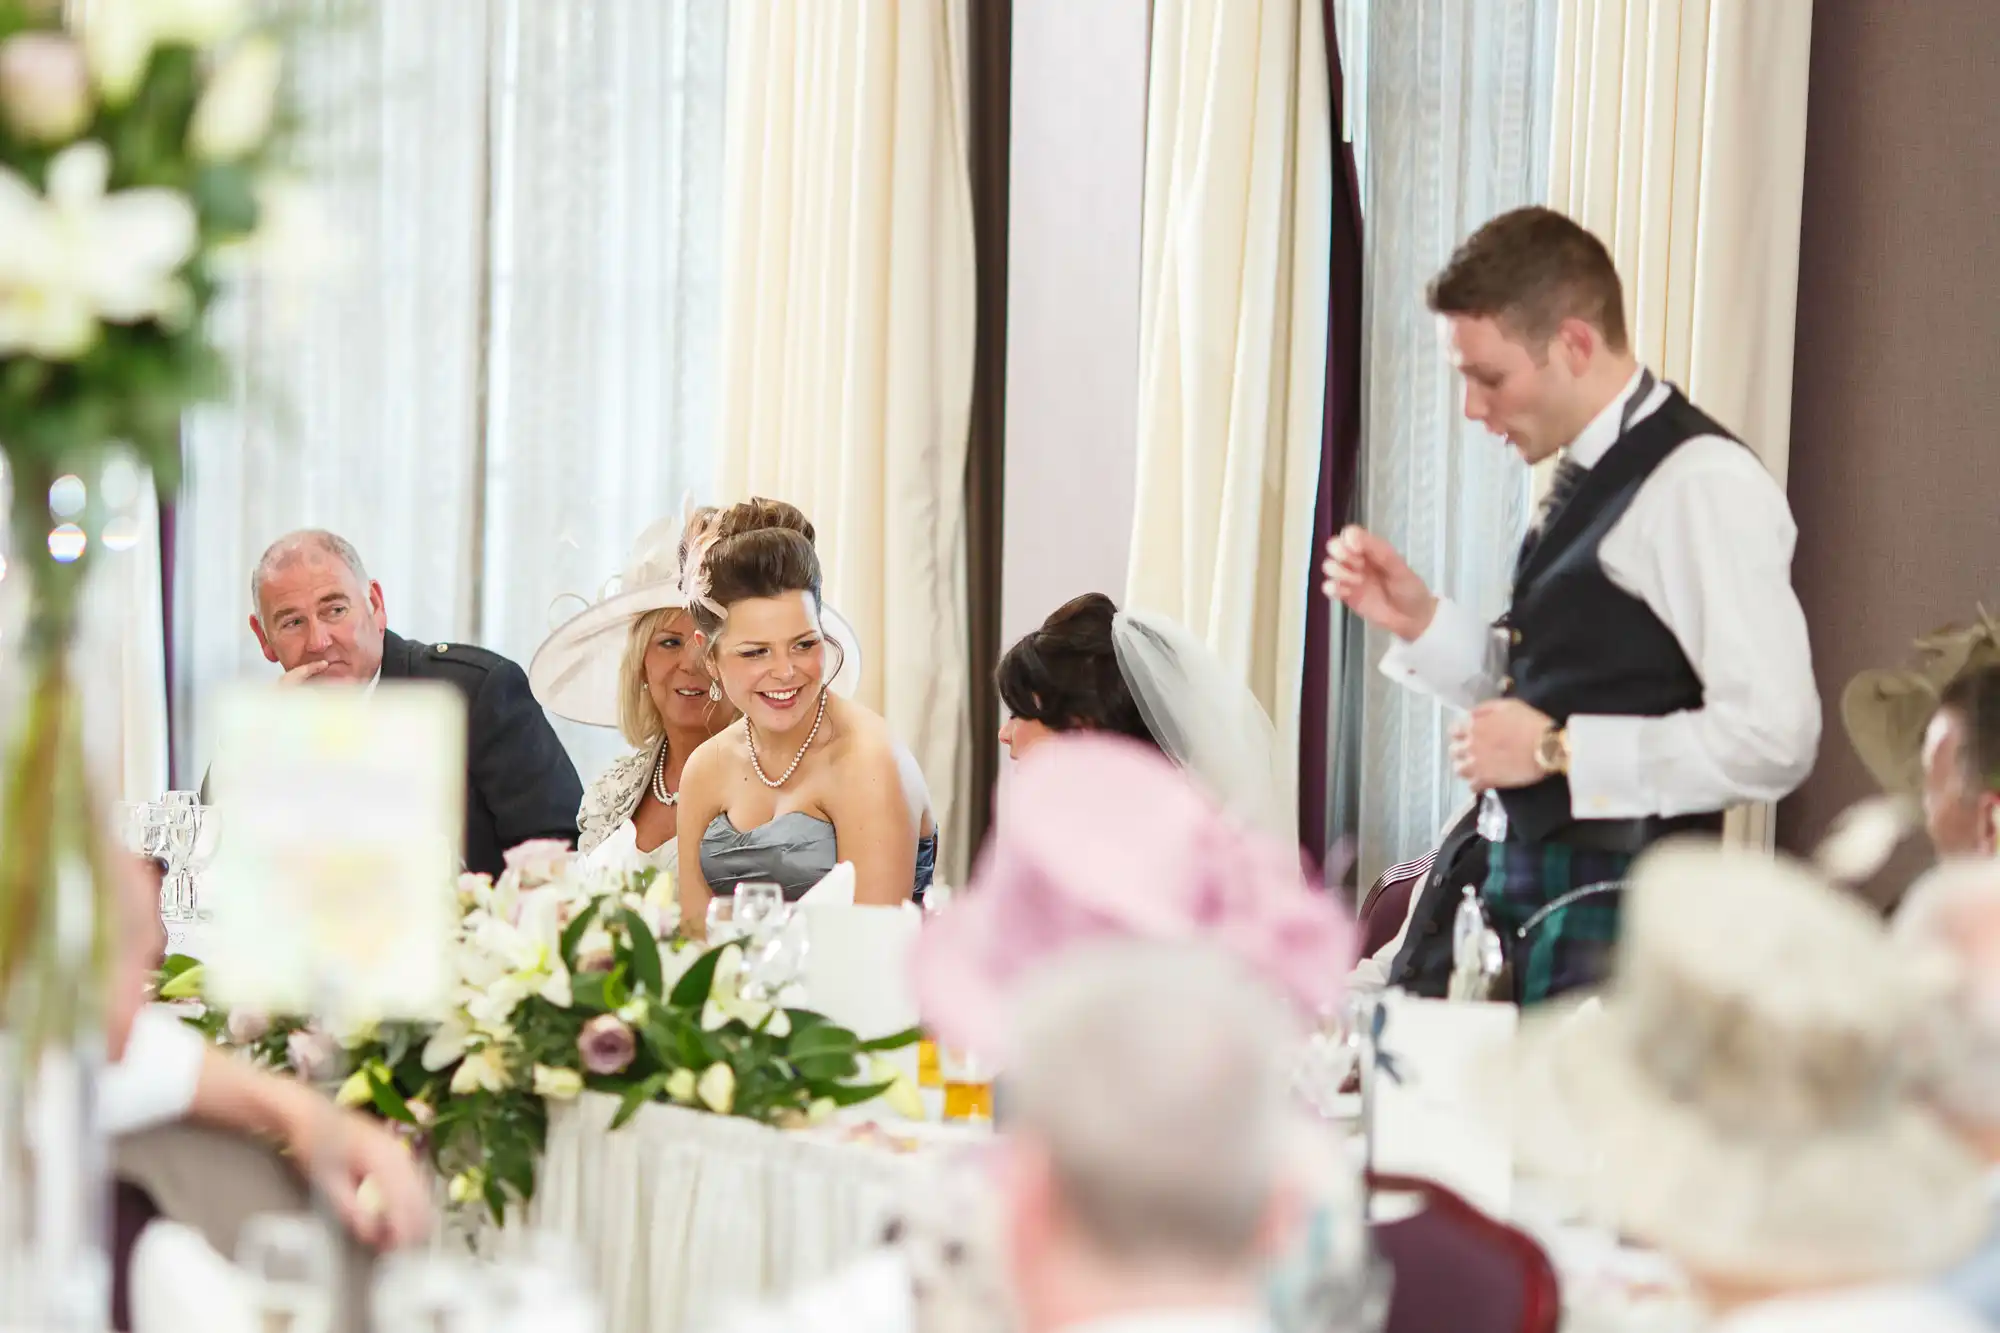 A joyful wedding reception with guests at tables; a man in a kilt is speaking as people listen and smile.